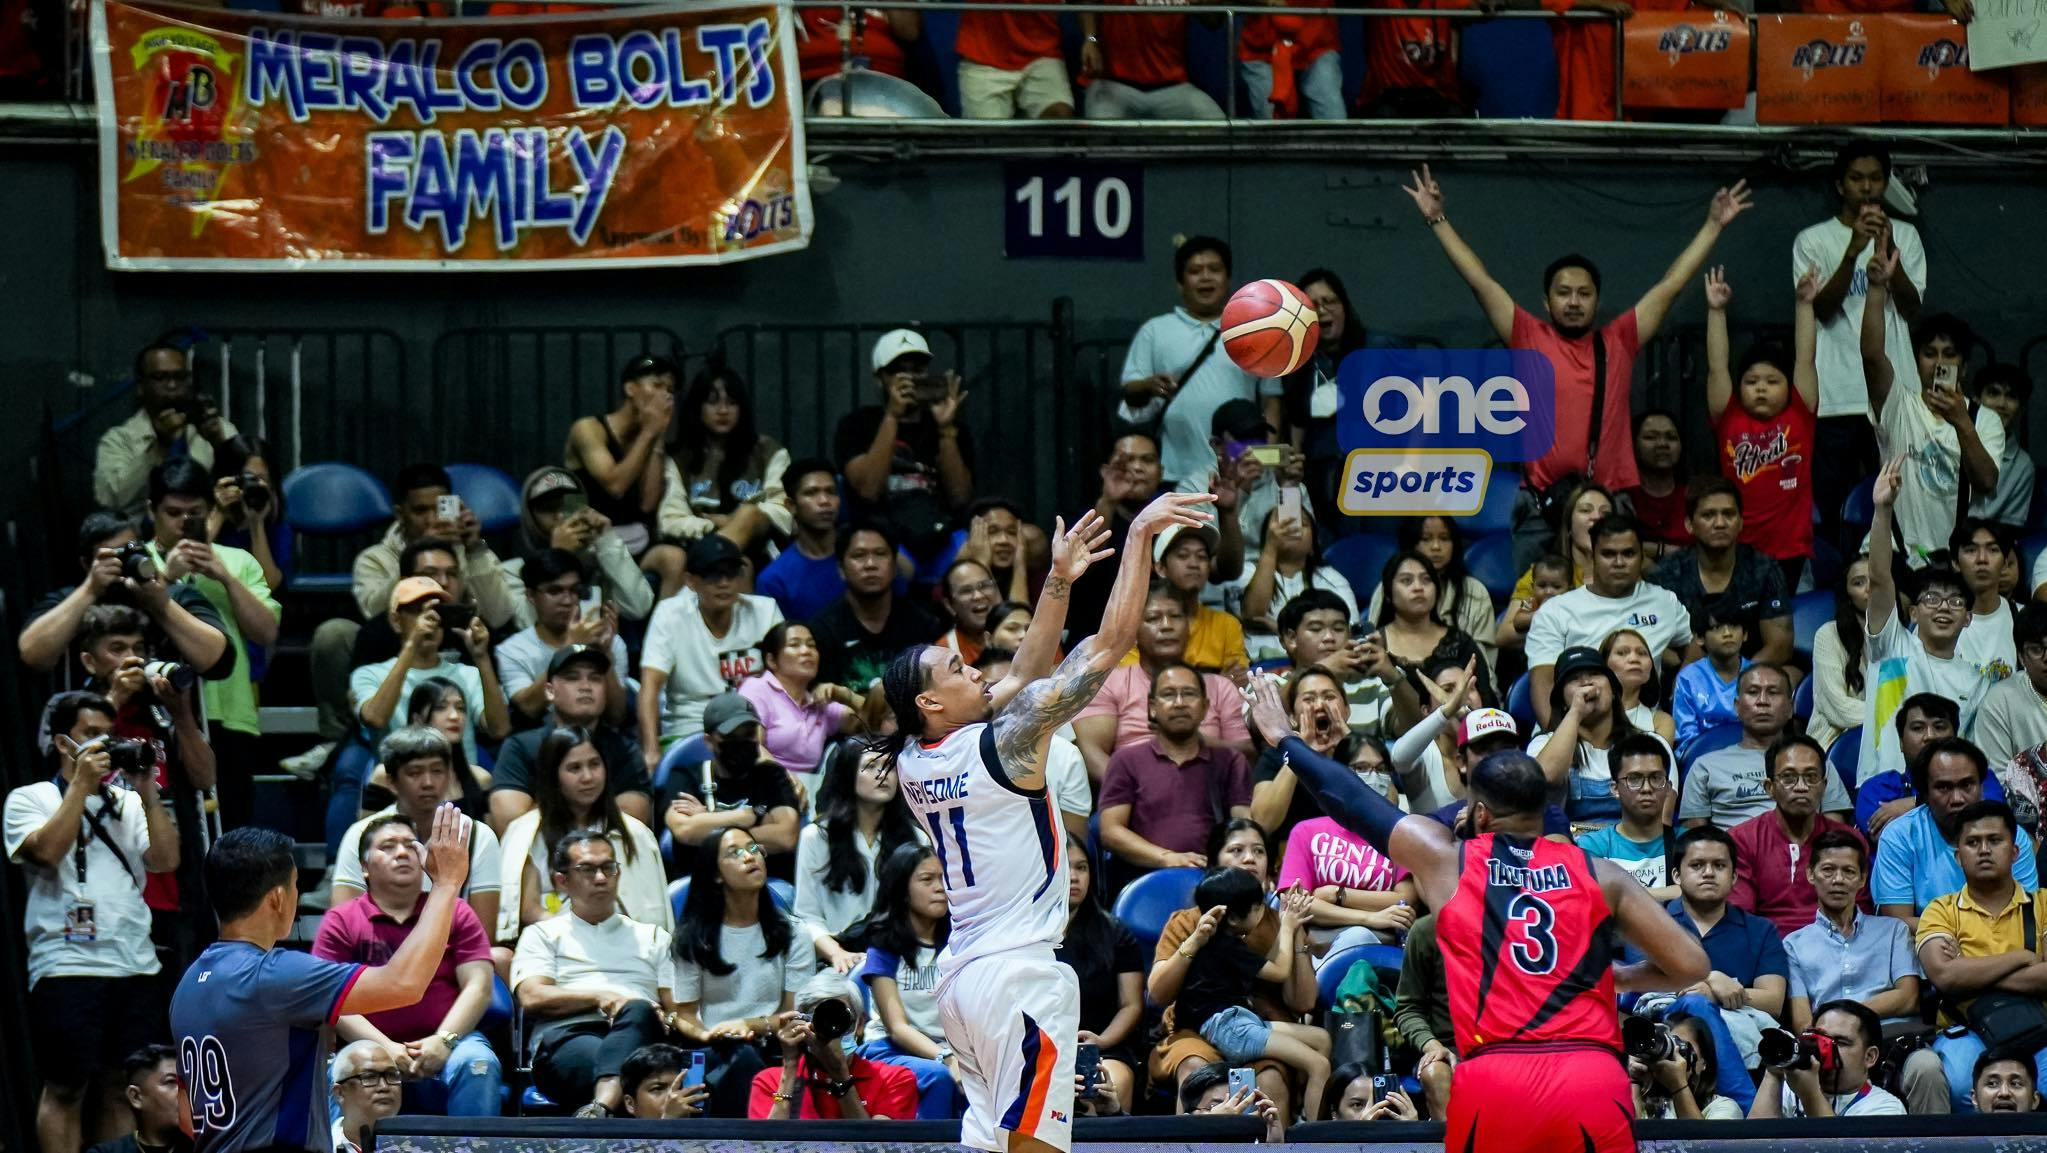 IN PHOTOS: Meralco finishes strong, snags Game 3 win over San Miguel in PBA Philippine Cup Finals